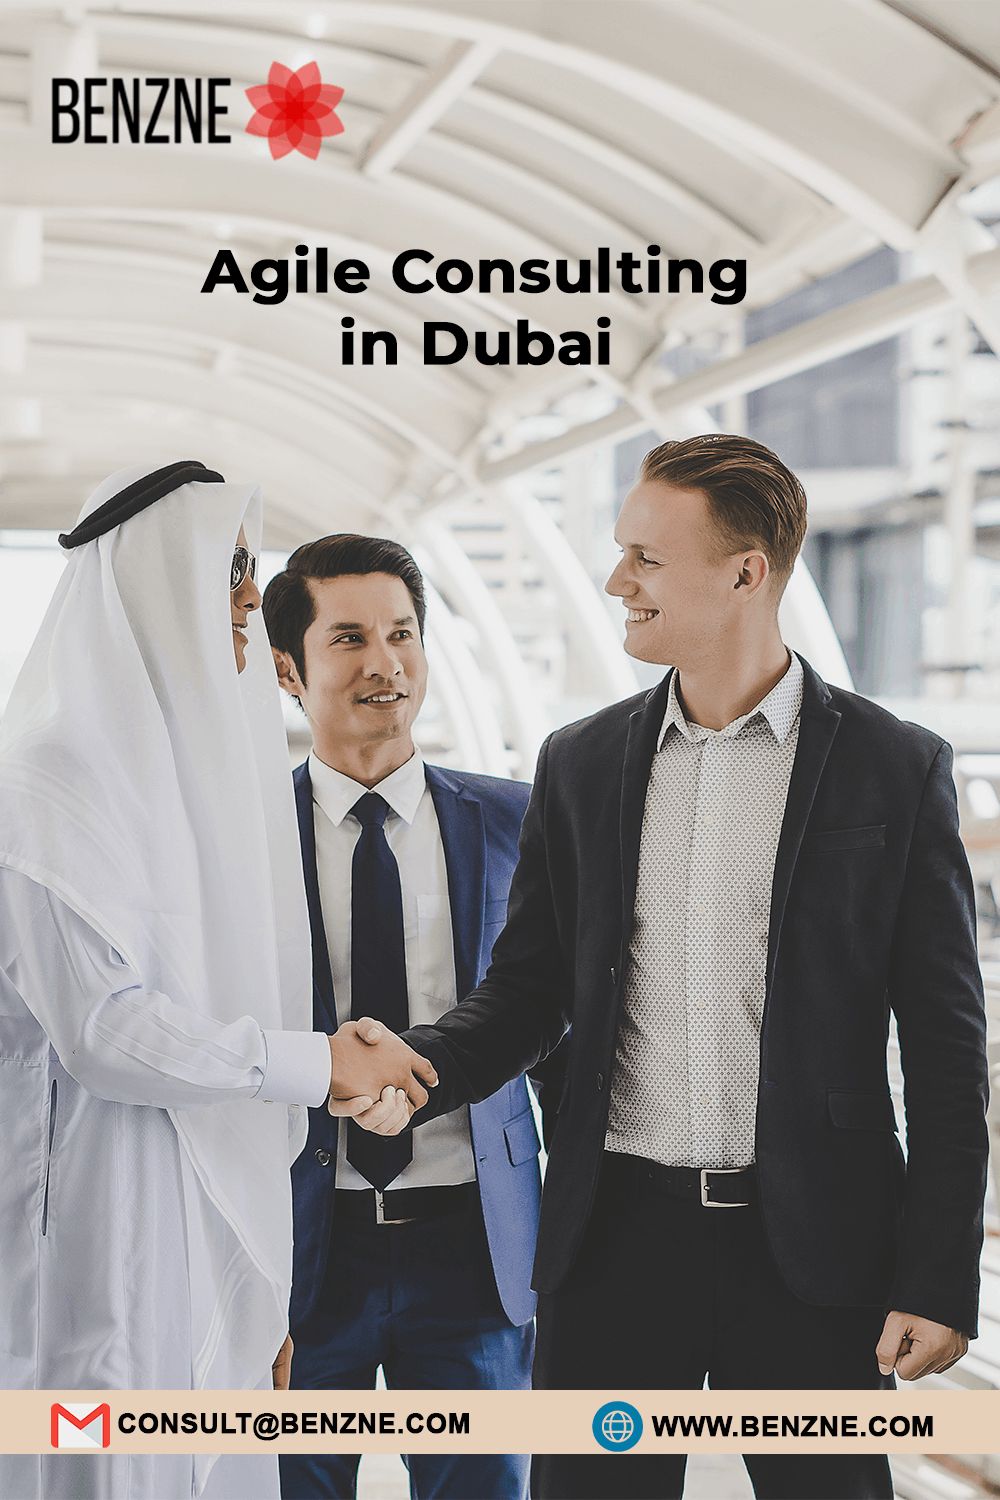 Agile Training in Dubai with Benzne to meet the agility needs with utmost effort